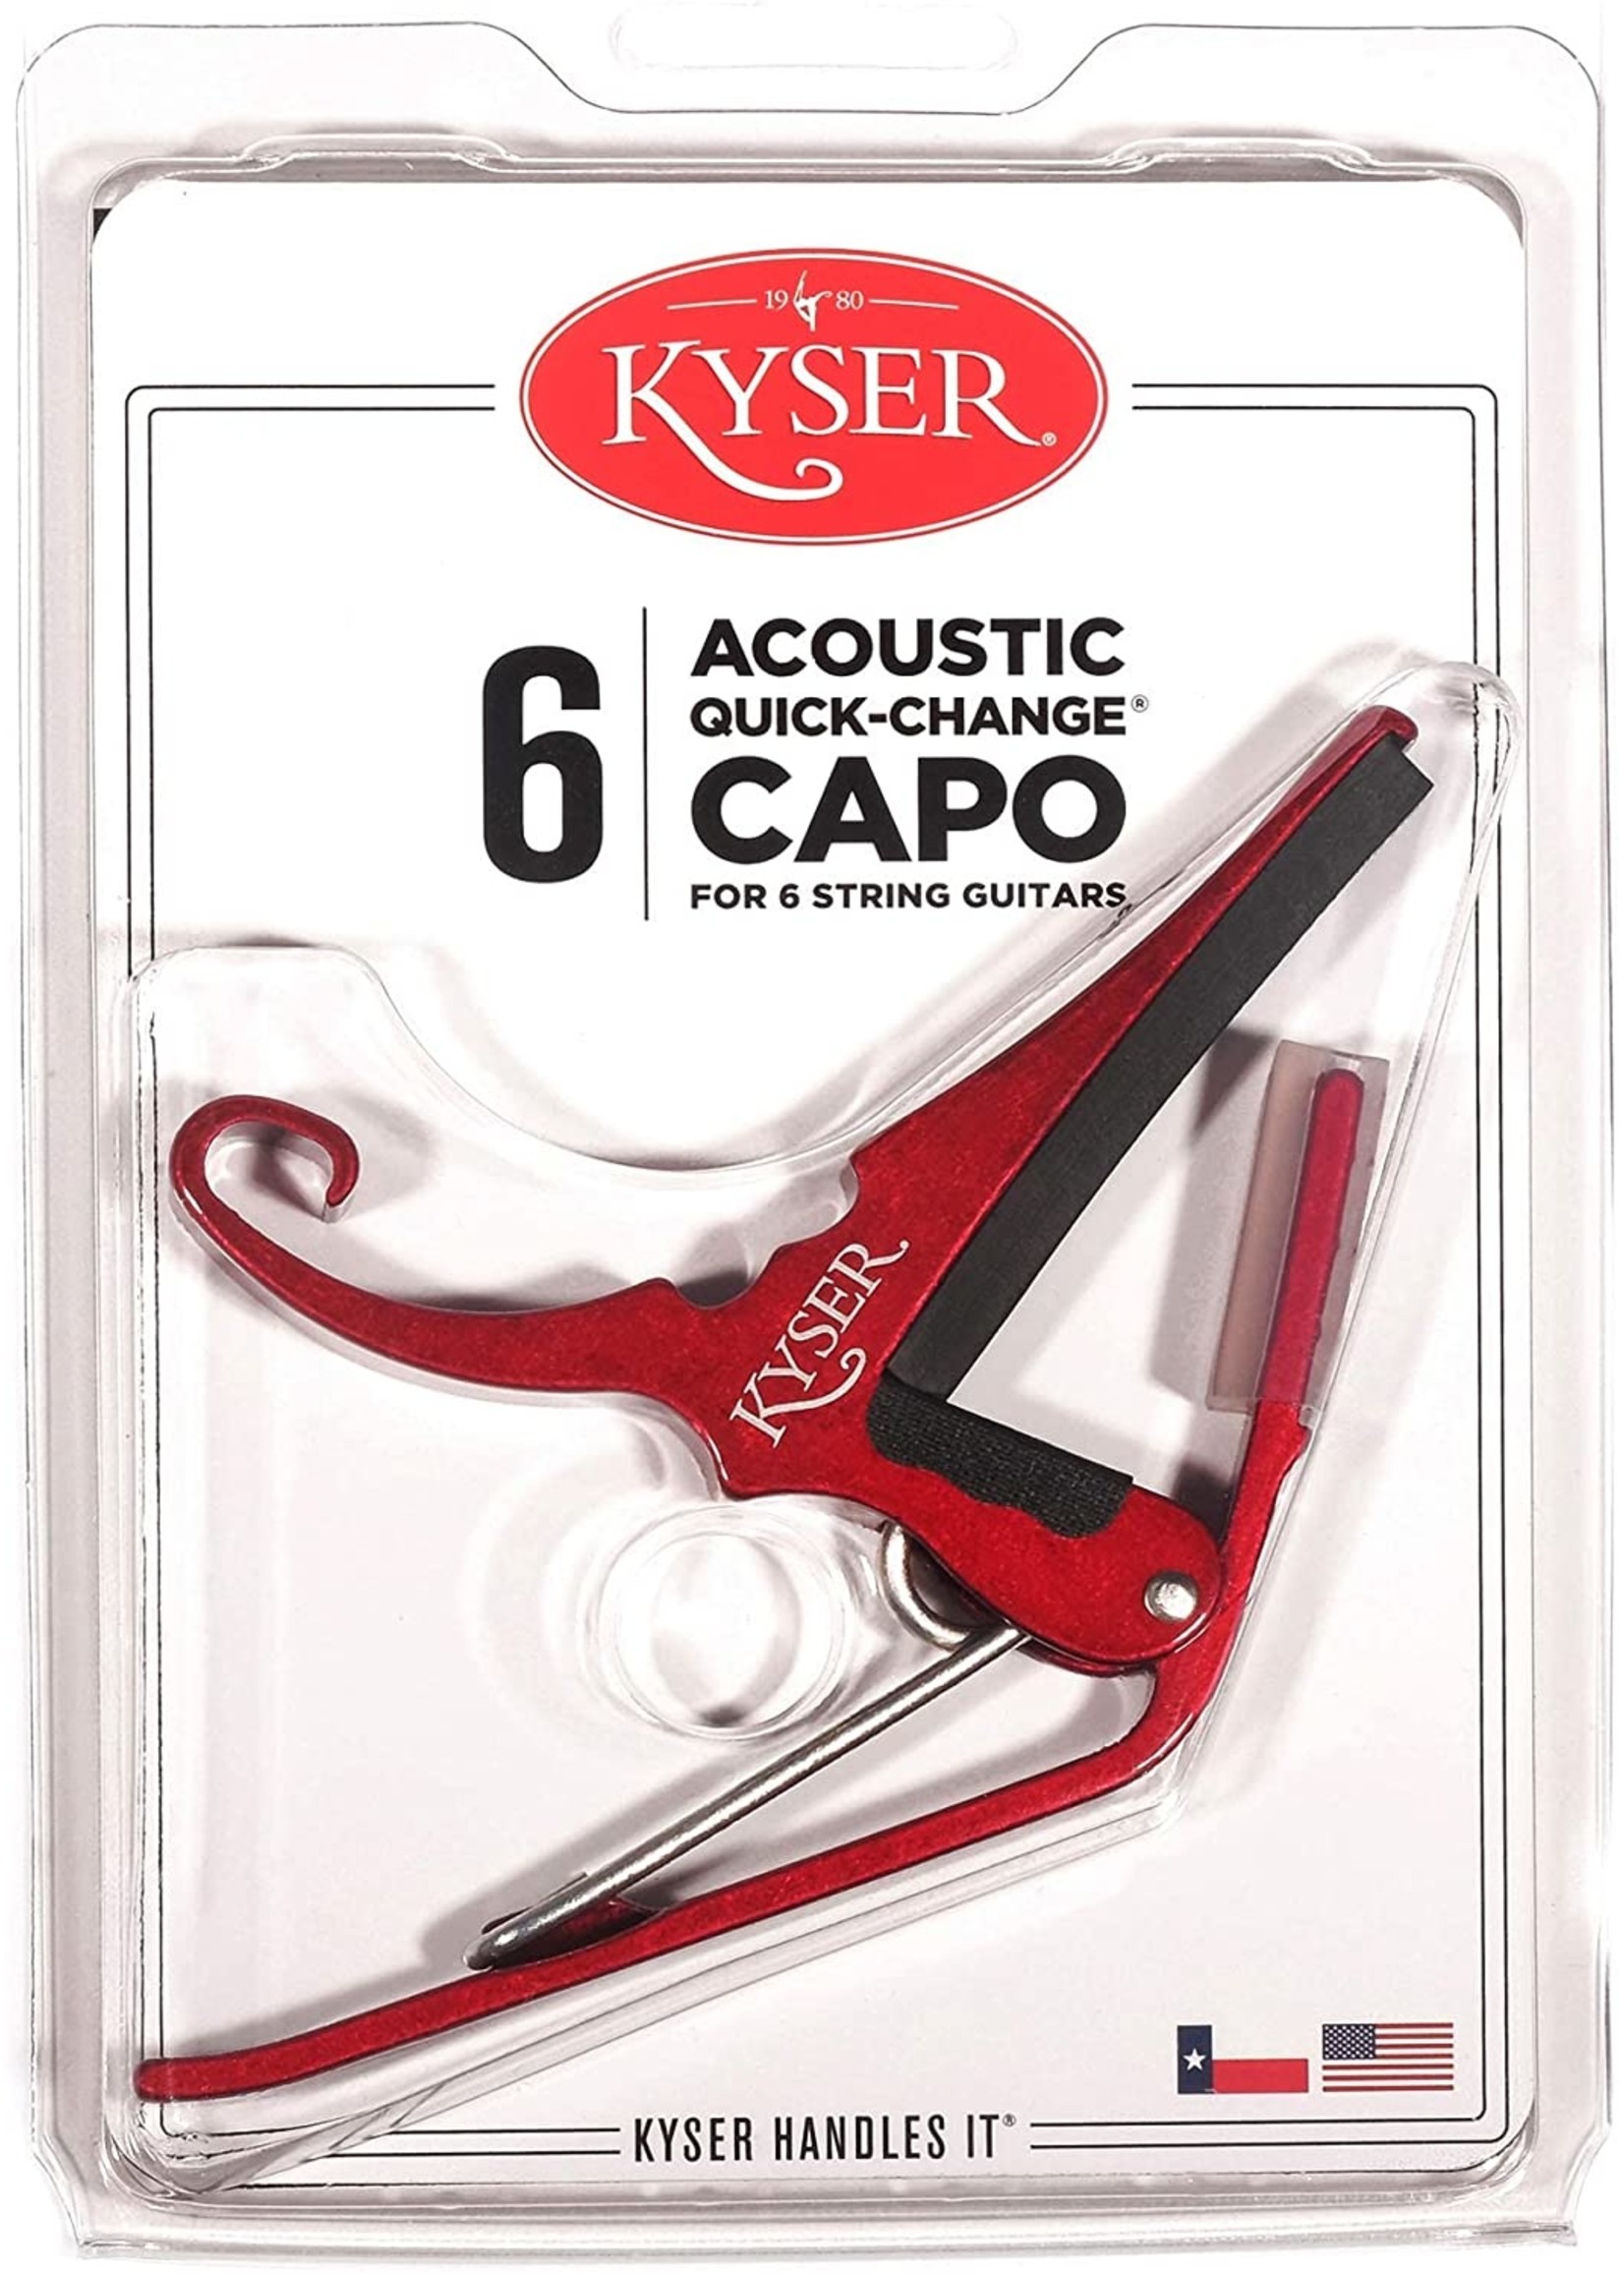 kyser Kyser Acoustic Quick Change Capo-6 String Red